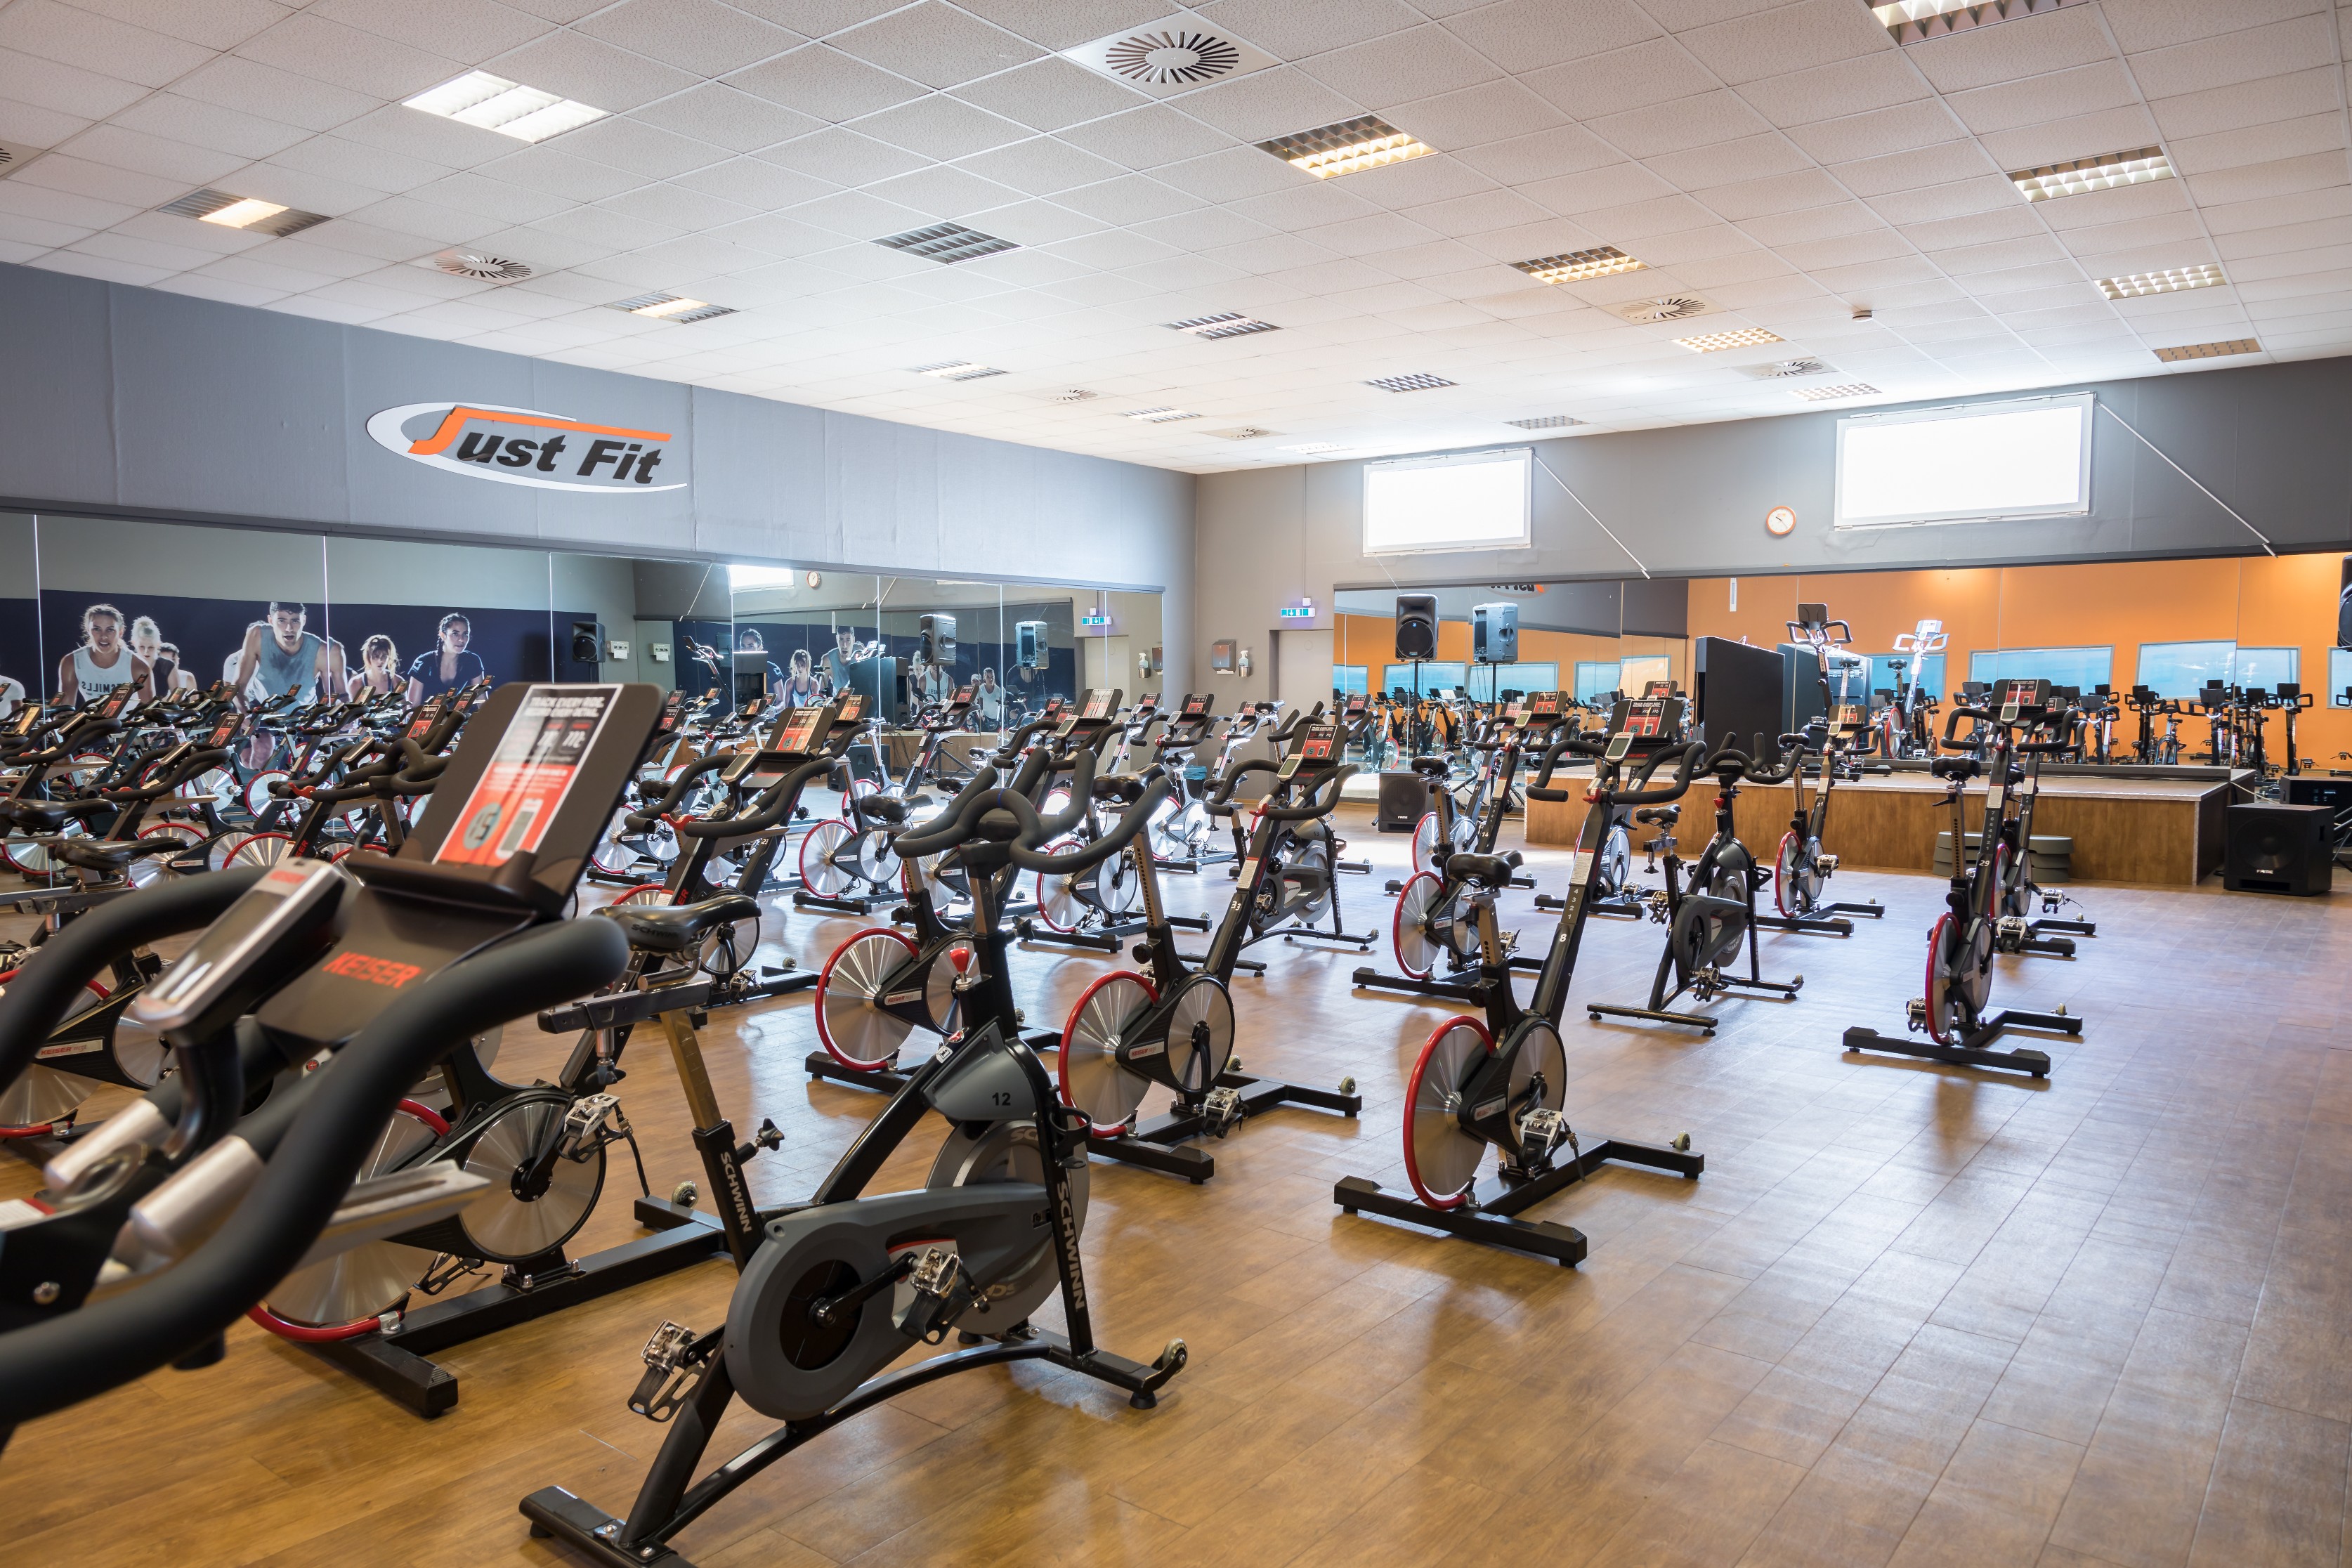 Indoorcycling Fitnessstudio Just Fit 03 Classic